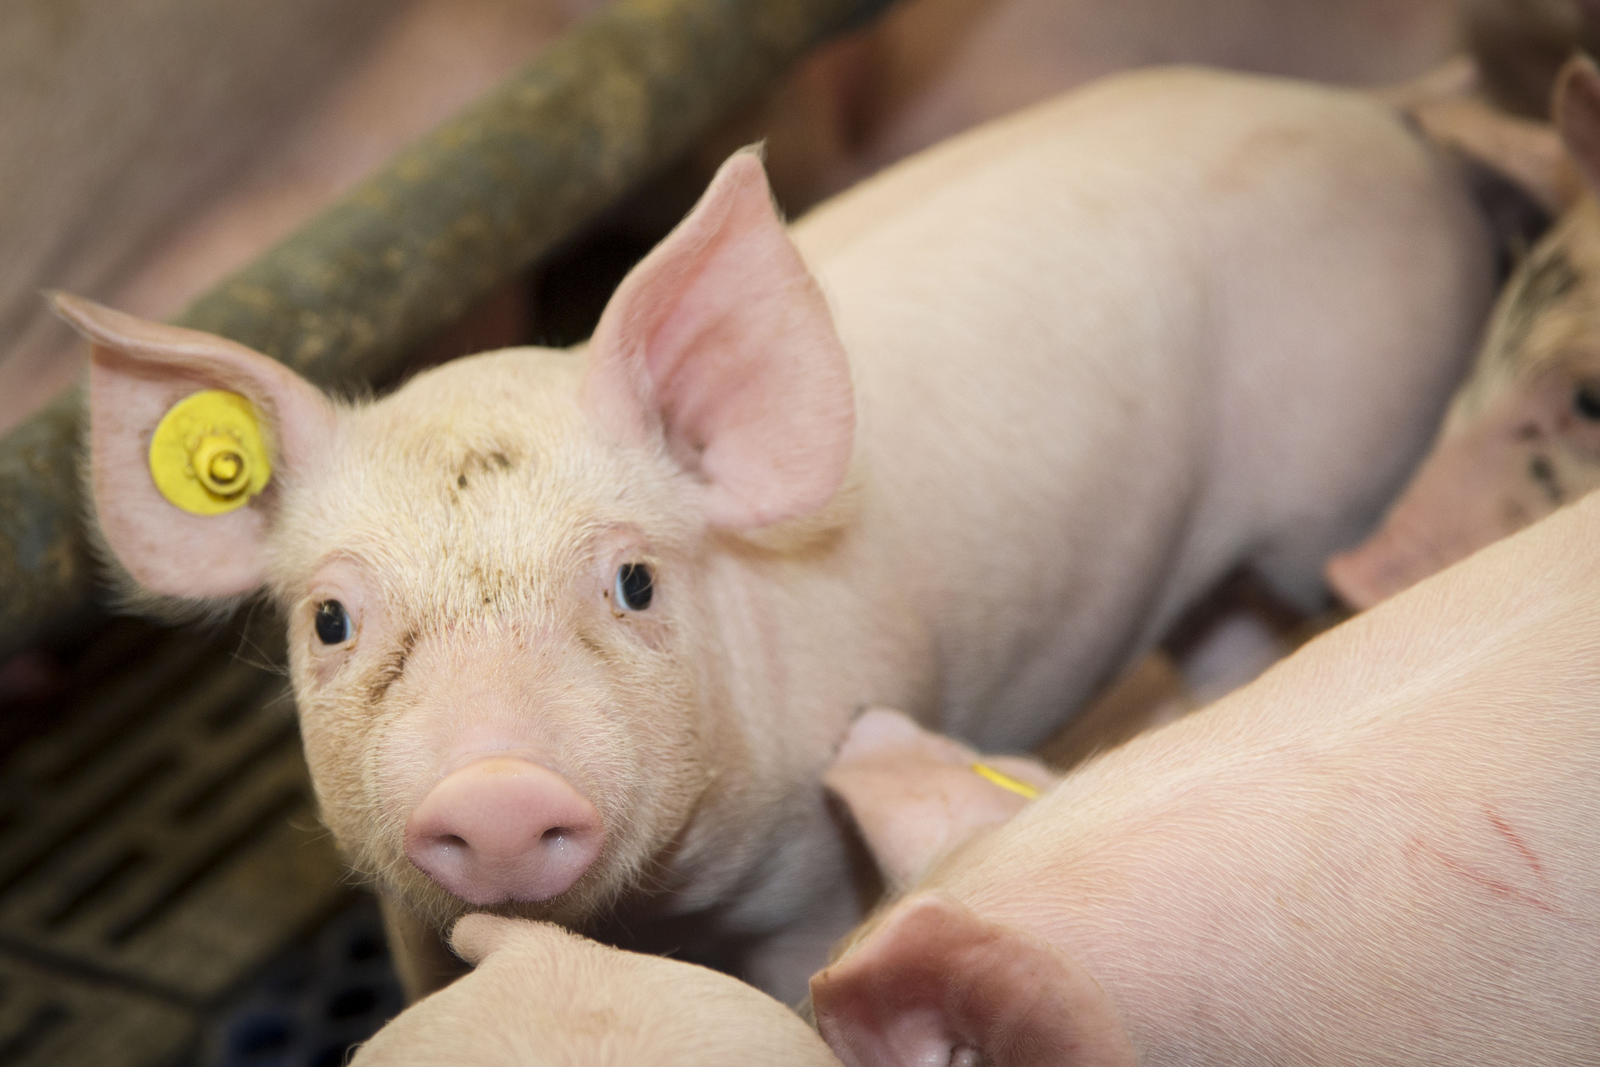 A fresh look at piglet nutrition before antimicrobials